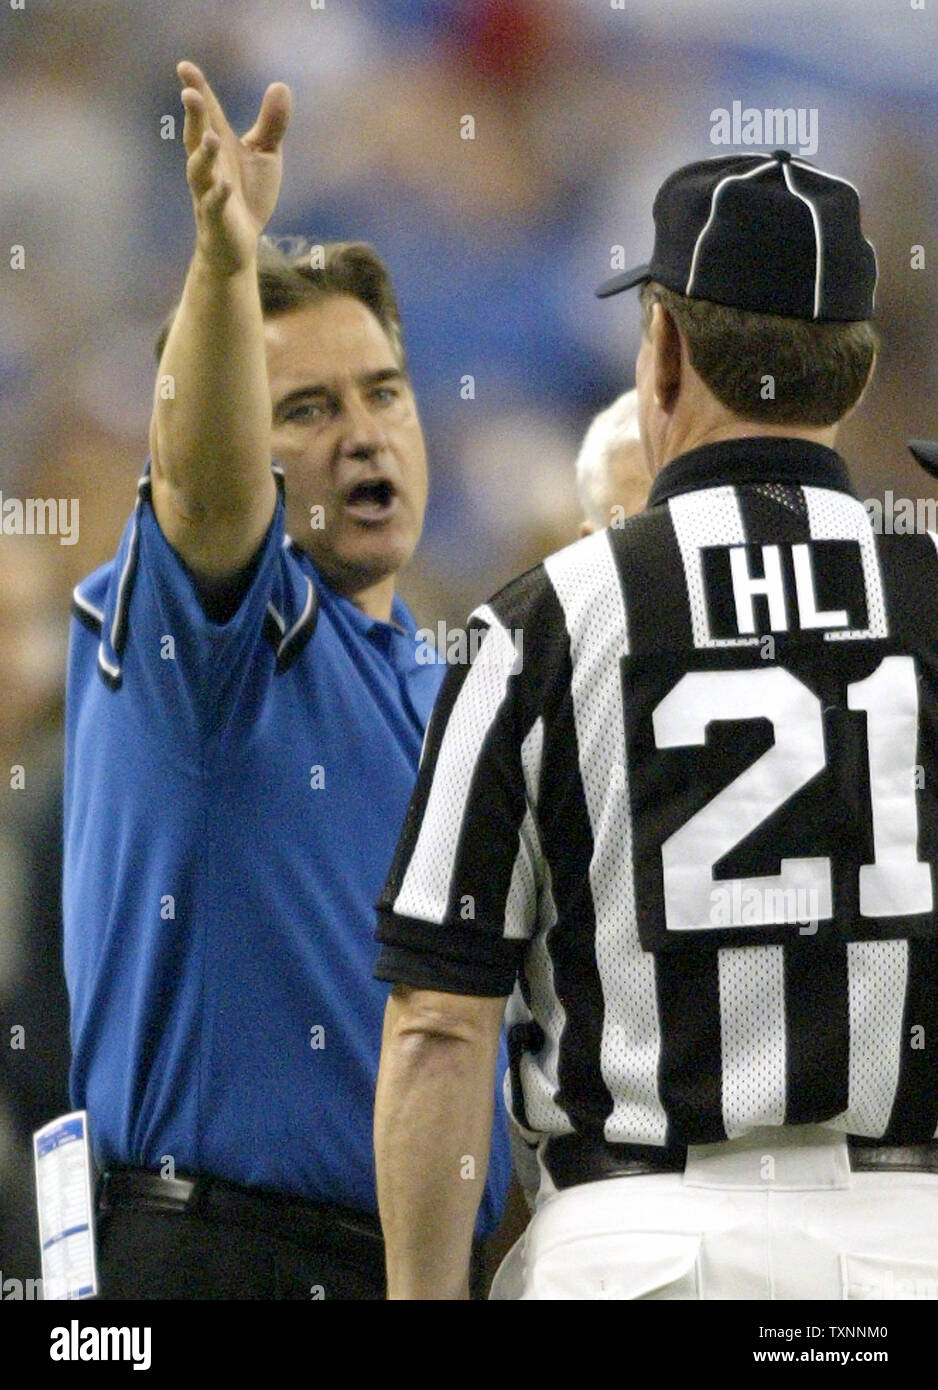 Detroit Lions coach Steve Marucci argues a call with head linesman John Schleyer in the fourth quarter against the Chicago Bears Oct. 30, 2005, at Ford Field in Detroit. The Lions lost to the Bears 19-13.  (UPI Photo/Scott R. Galvin) Stock Photo